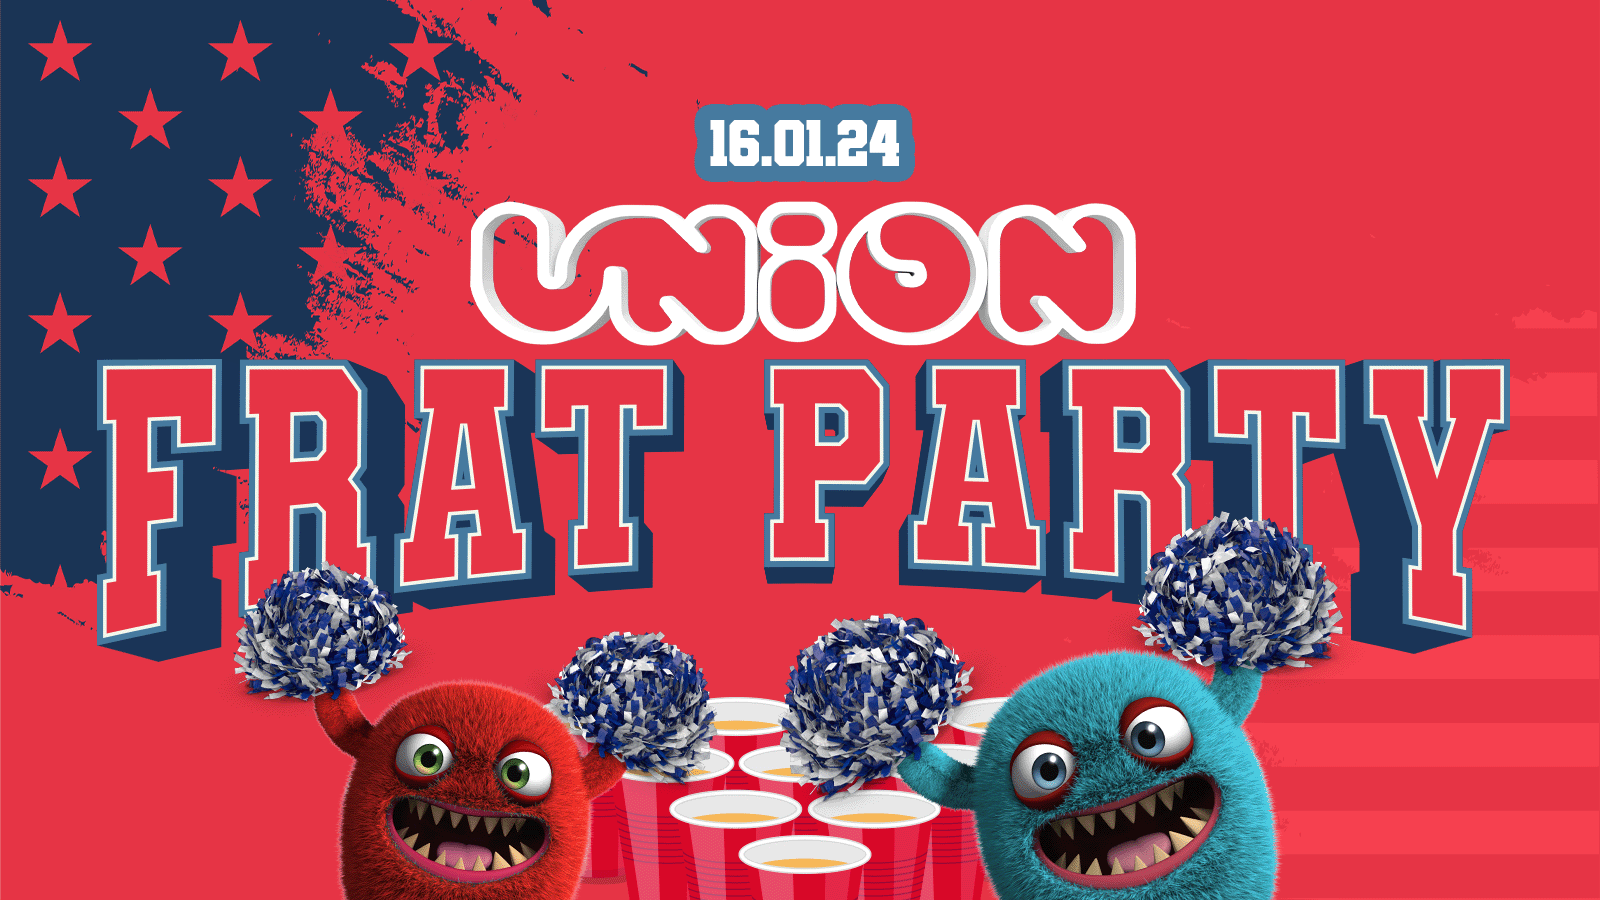 UNION TUESDAY’S // 🇺🇸 FRAT PARTY 🇺🇸